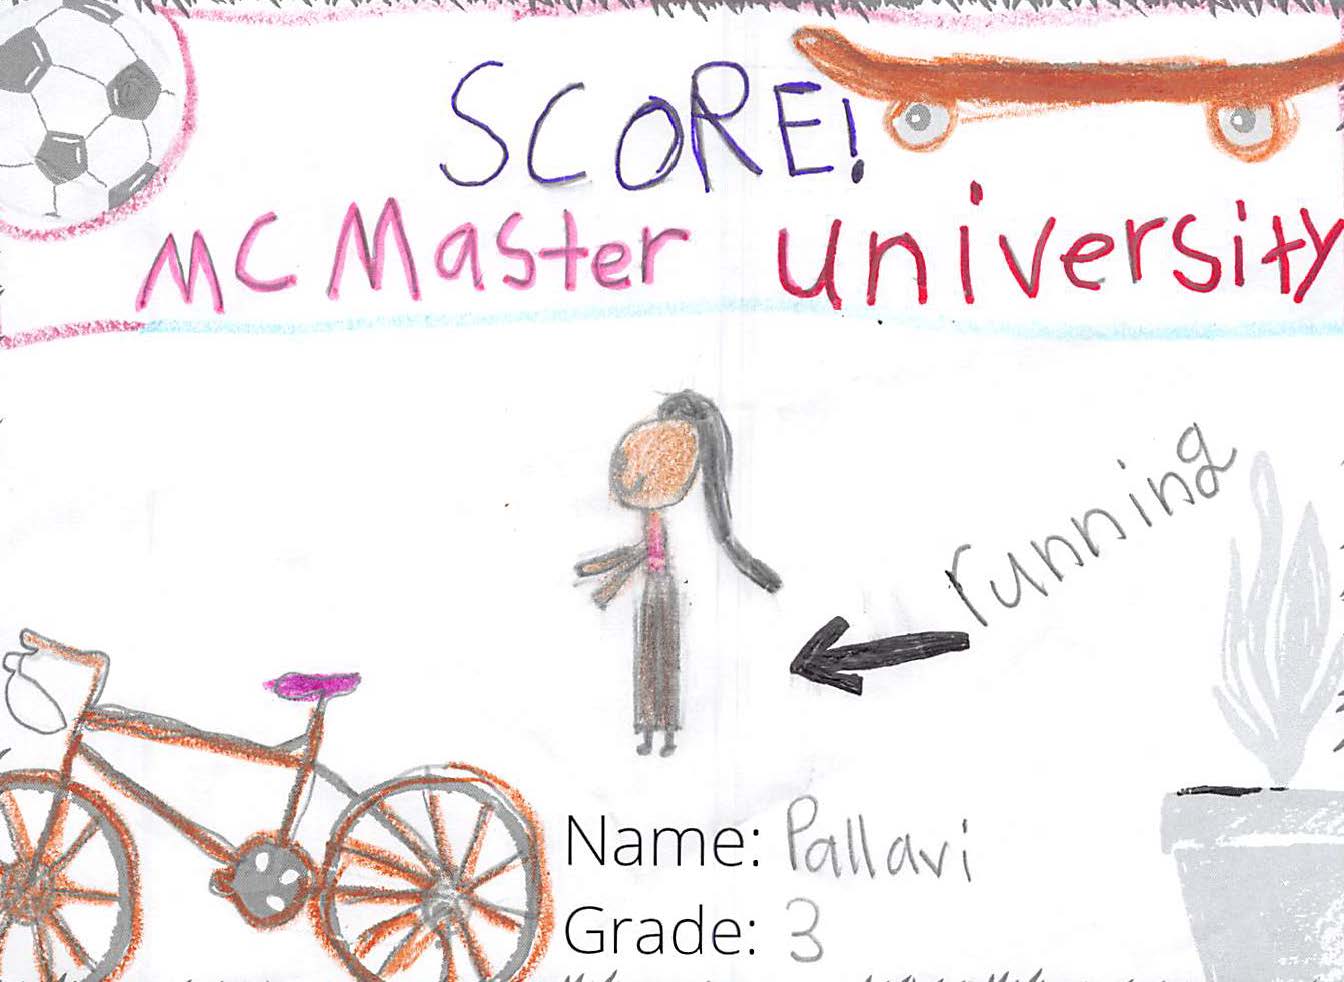 Pencil crayon drawing for the SCORE! logo contest. There is a girl running and text that says: SCORE! McMaster University.